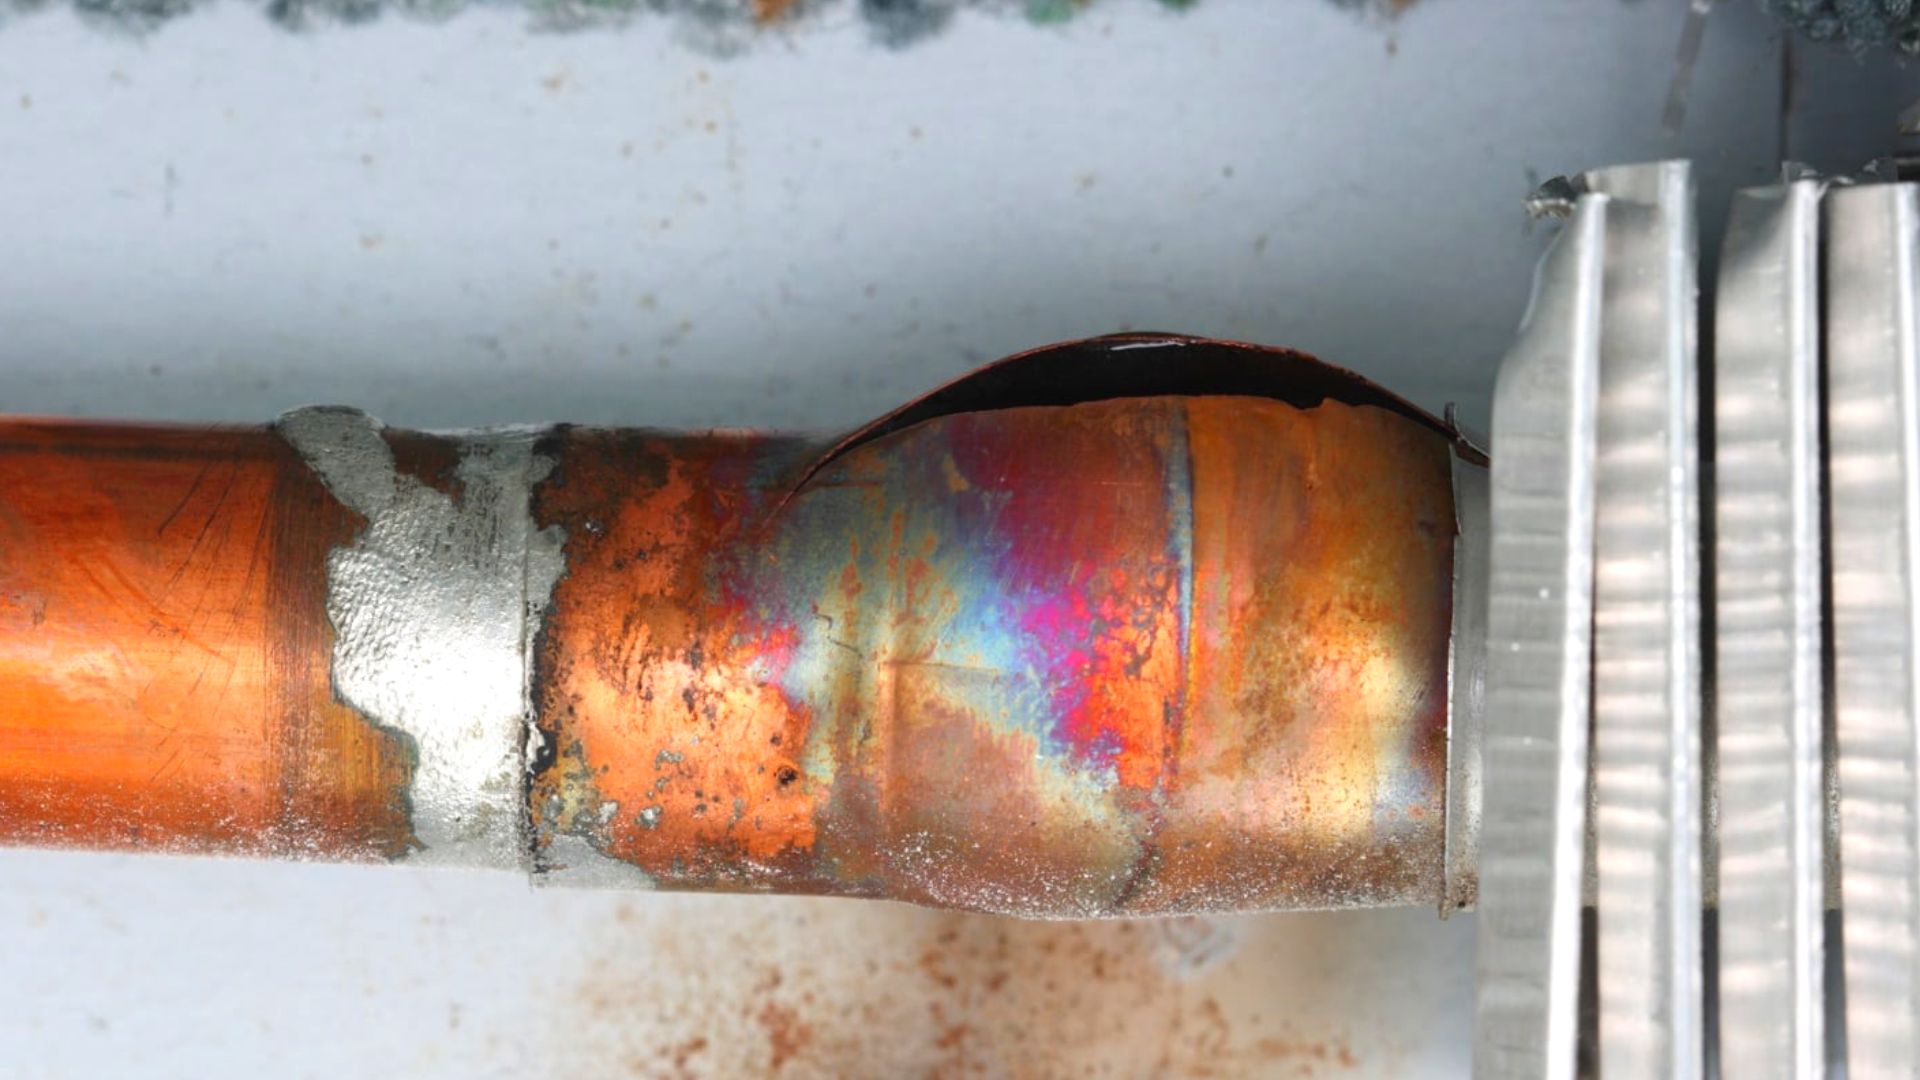 Copper Pipe Burst At Joint